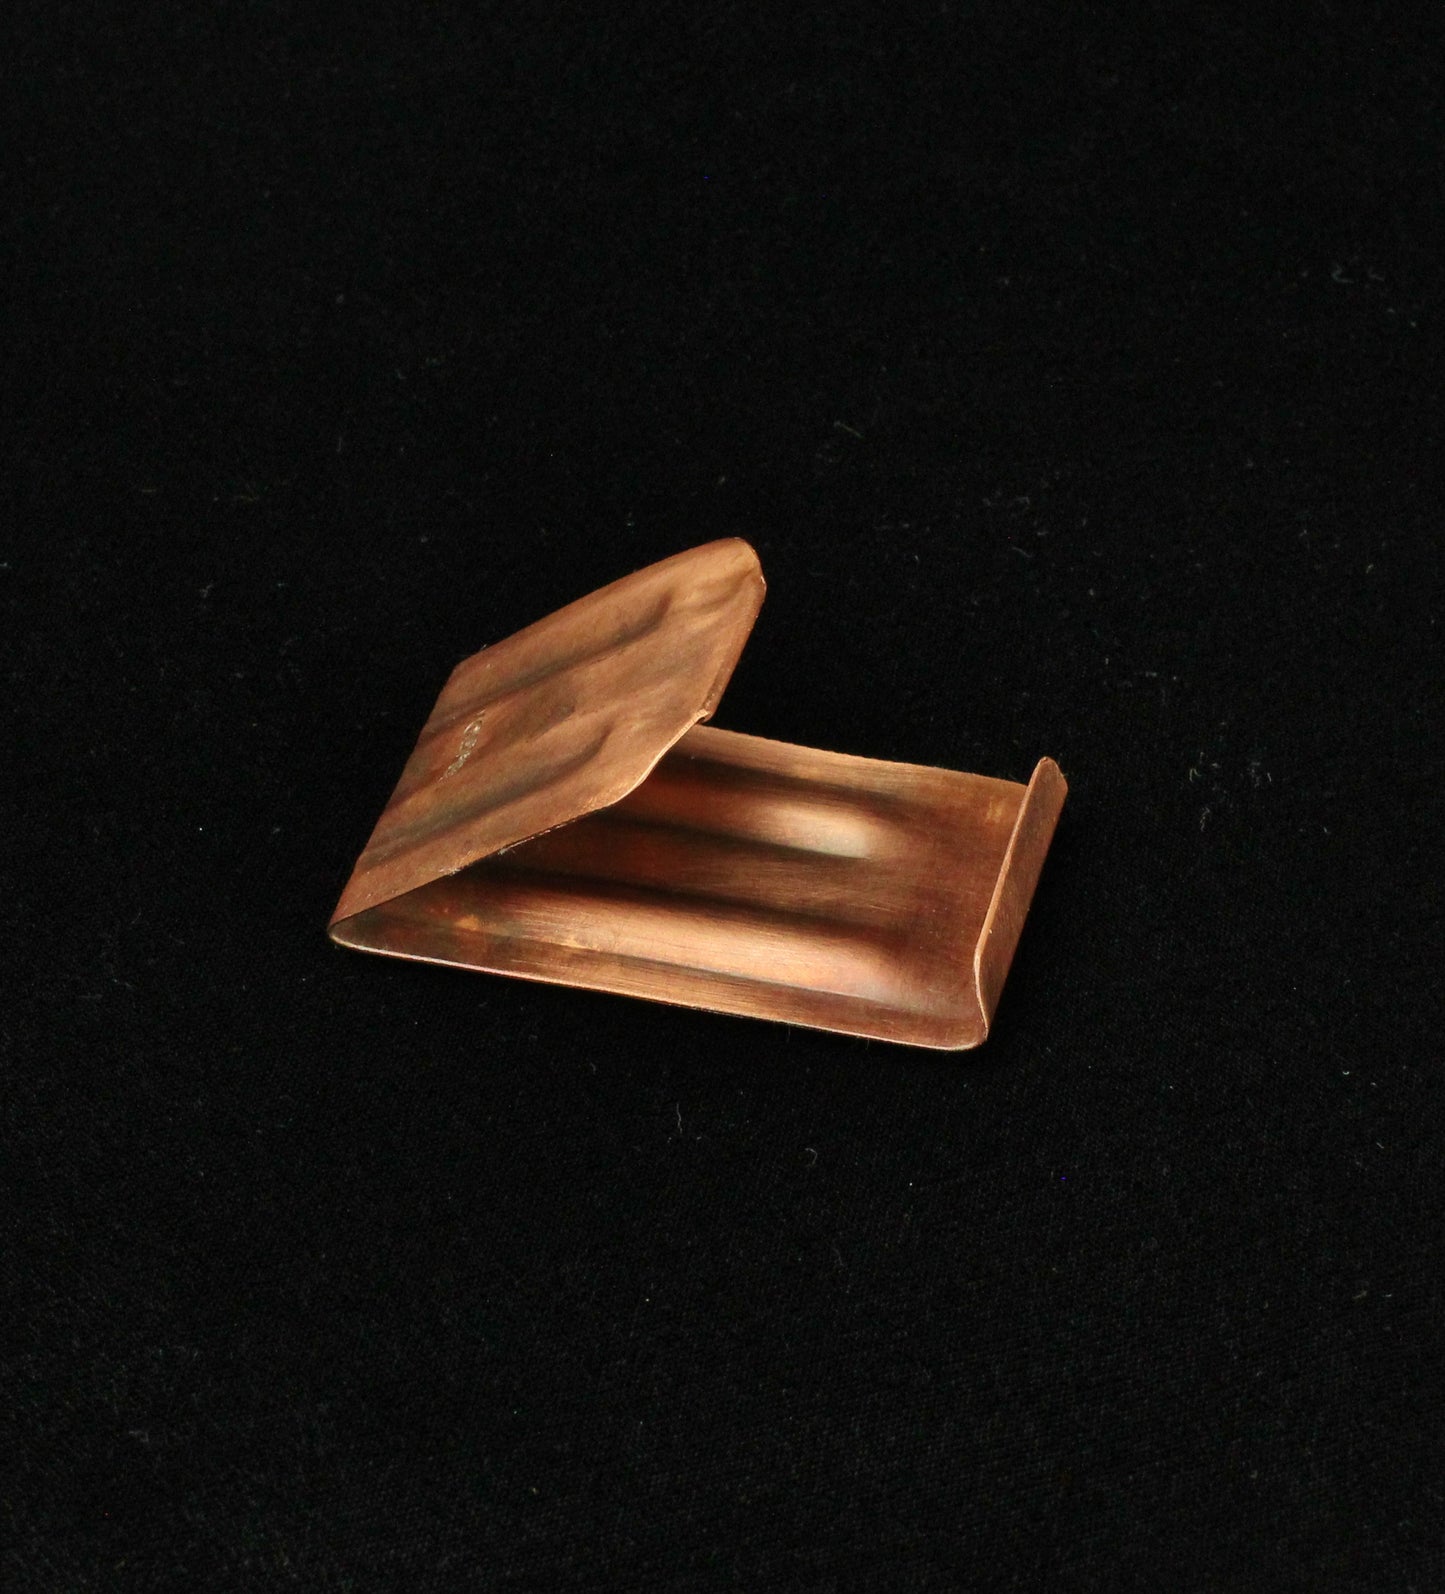 Copper Easel, Mini, For Displaying, 2" x 3.5" or 2" x 5" Mini Tiles/Trays.